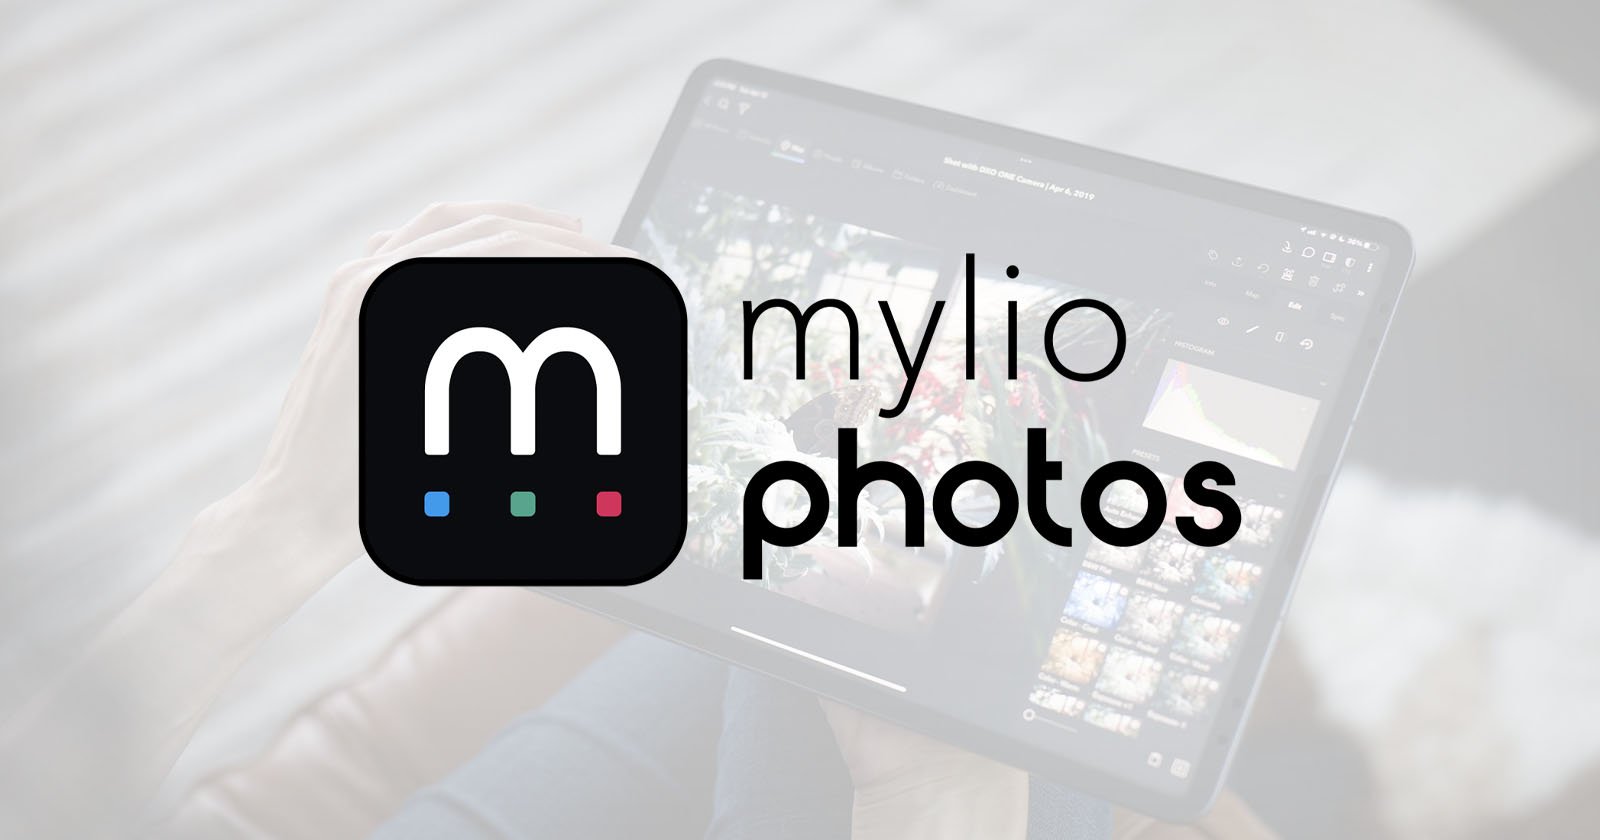 Mylio Photos Can Sync Your Photos Across Devices Without the Internet